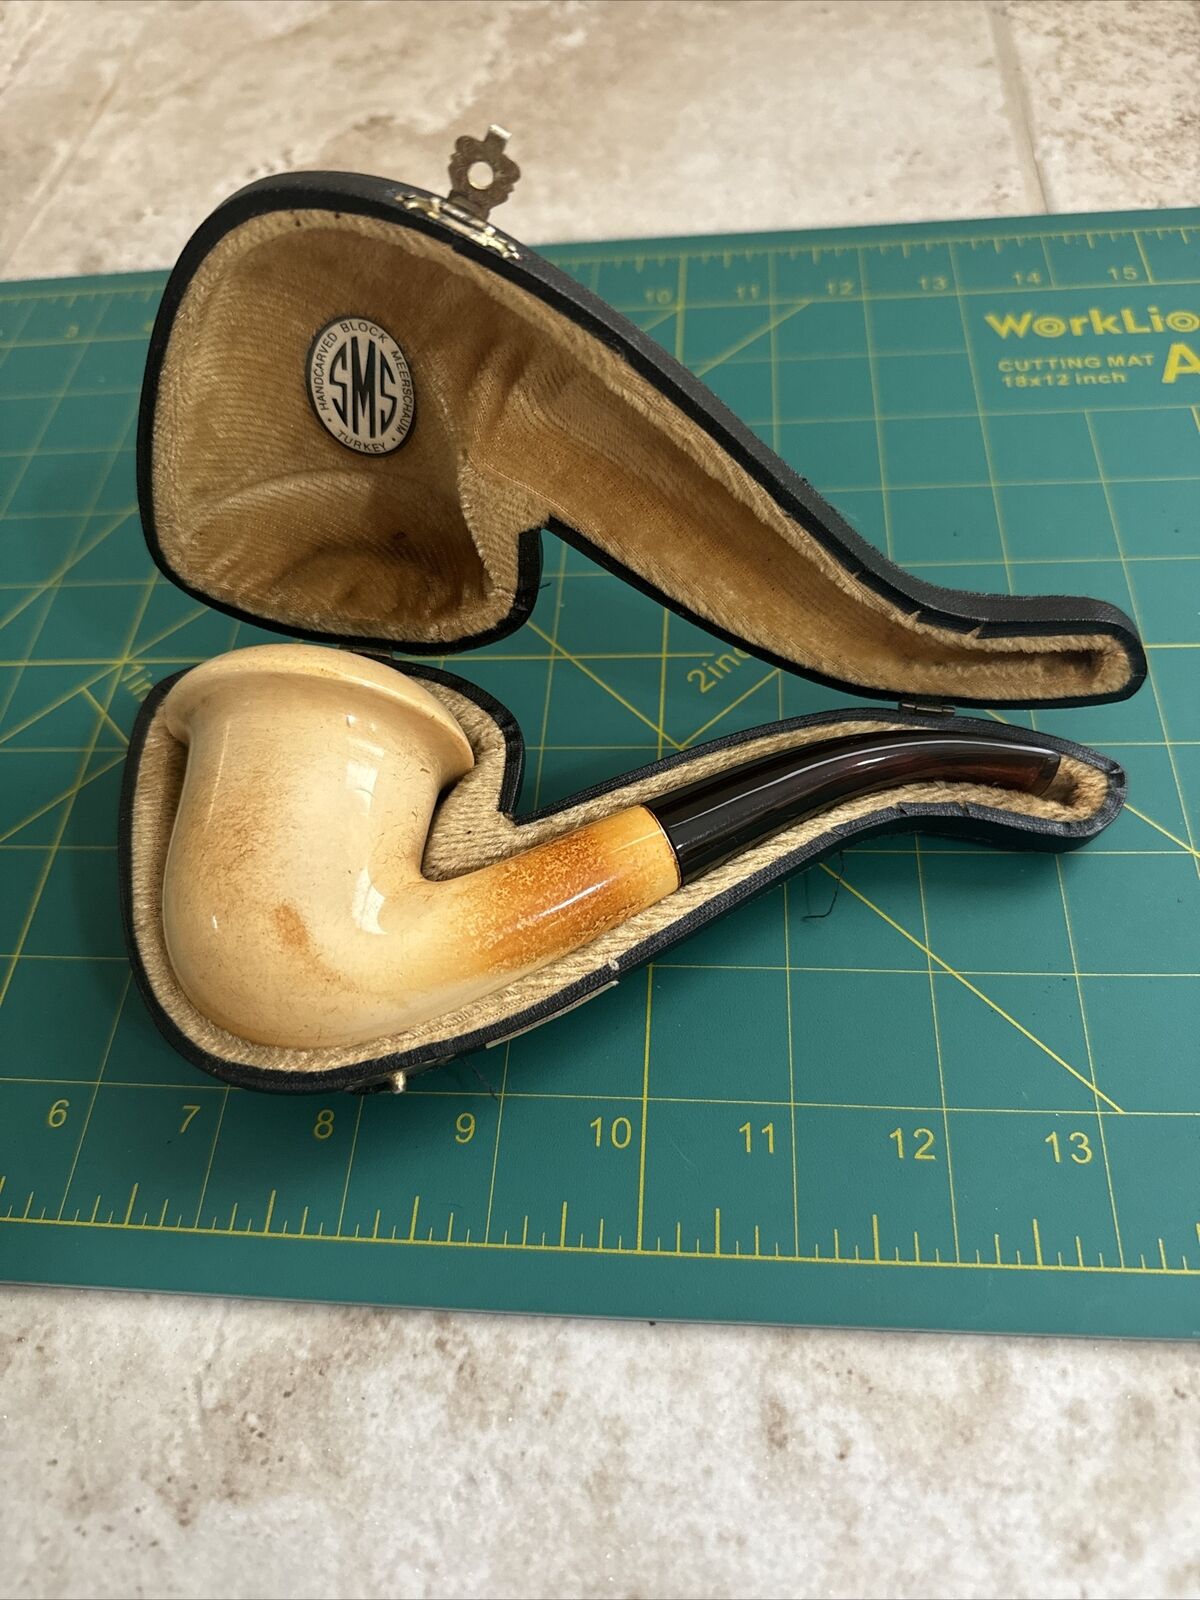 SMS Meerschaum Calabash Tobacco Pipe Amazing Pipe Great Color